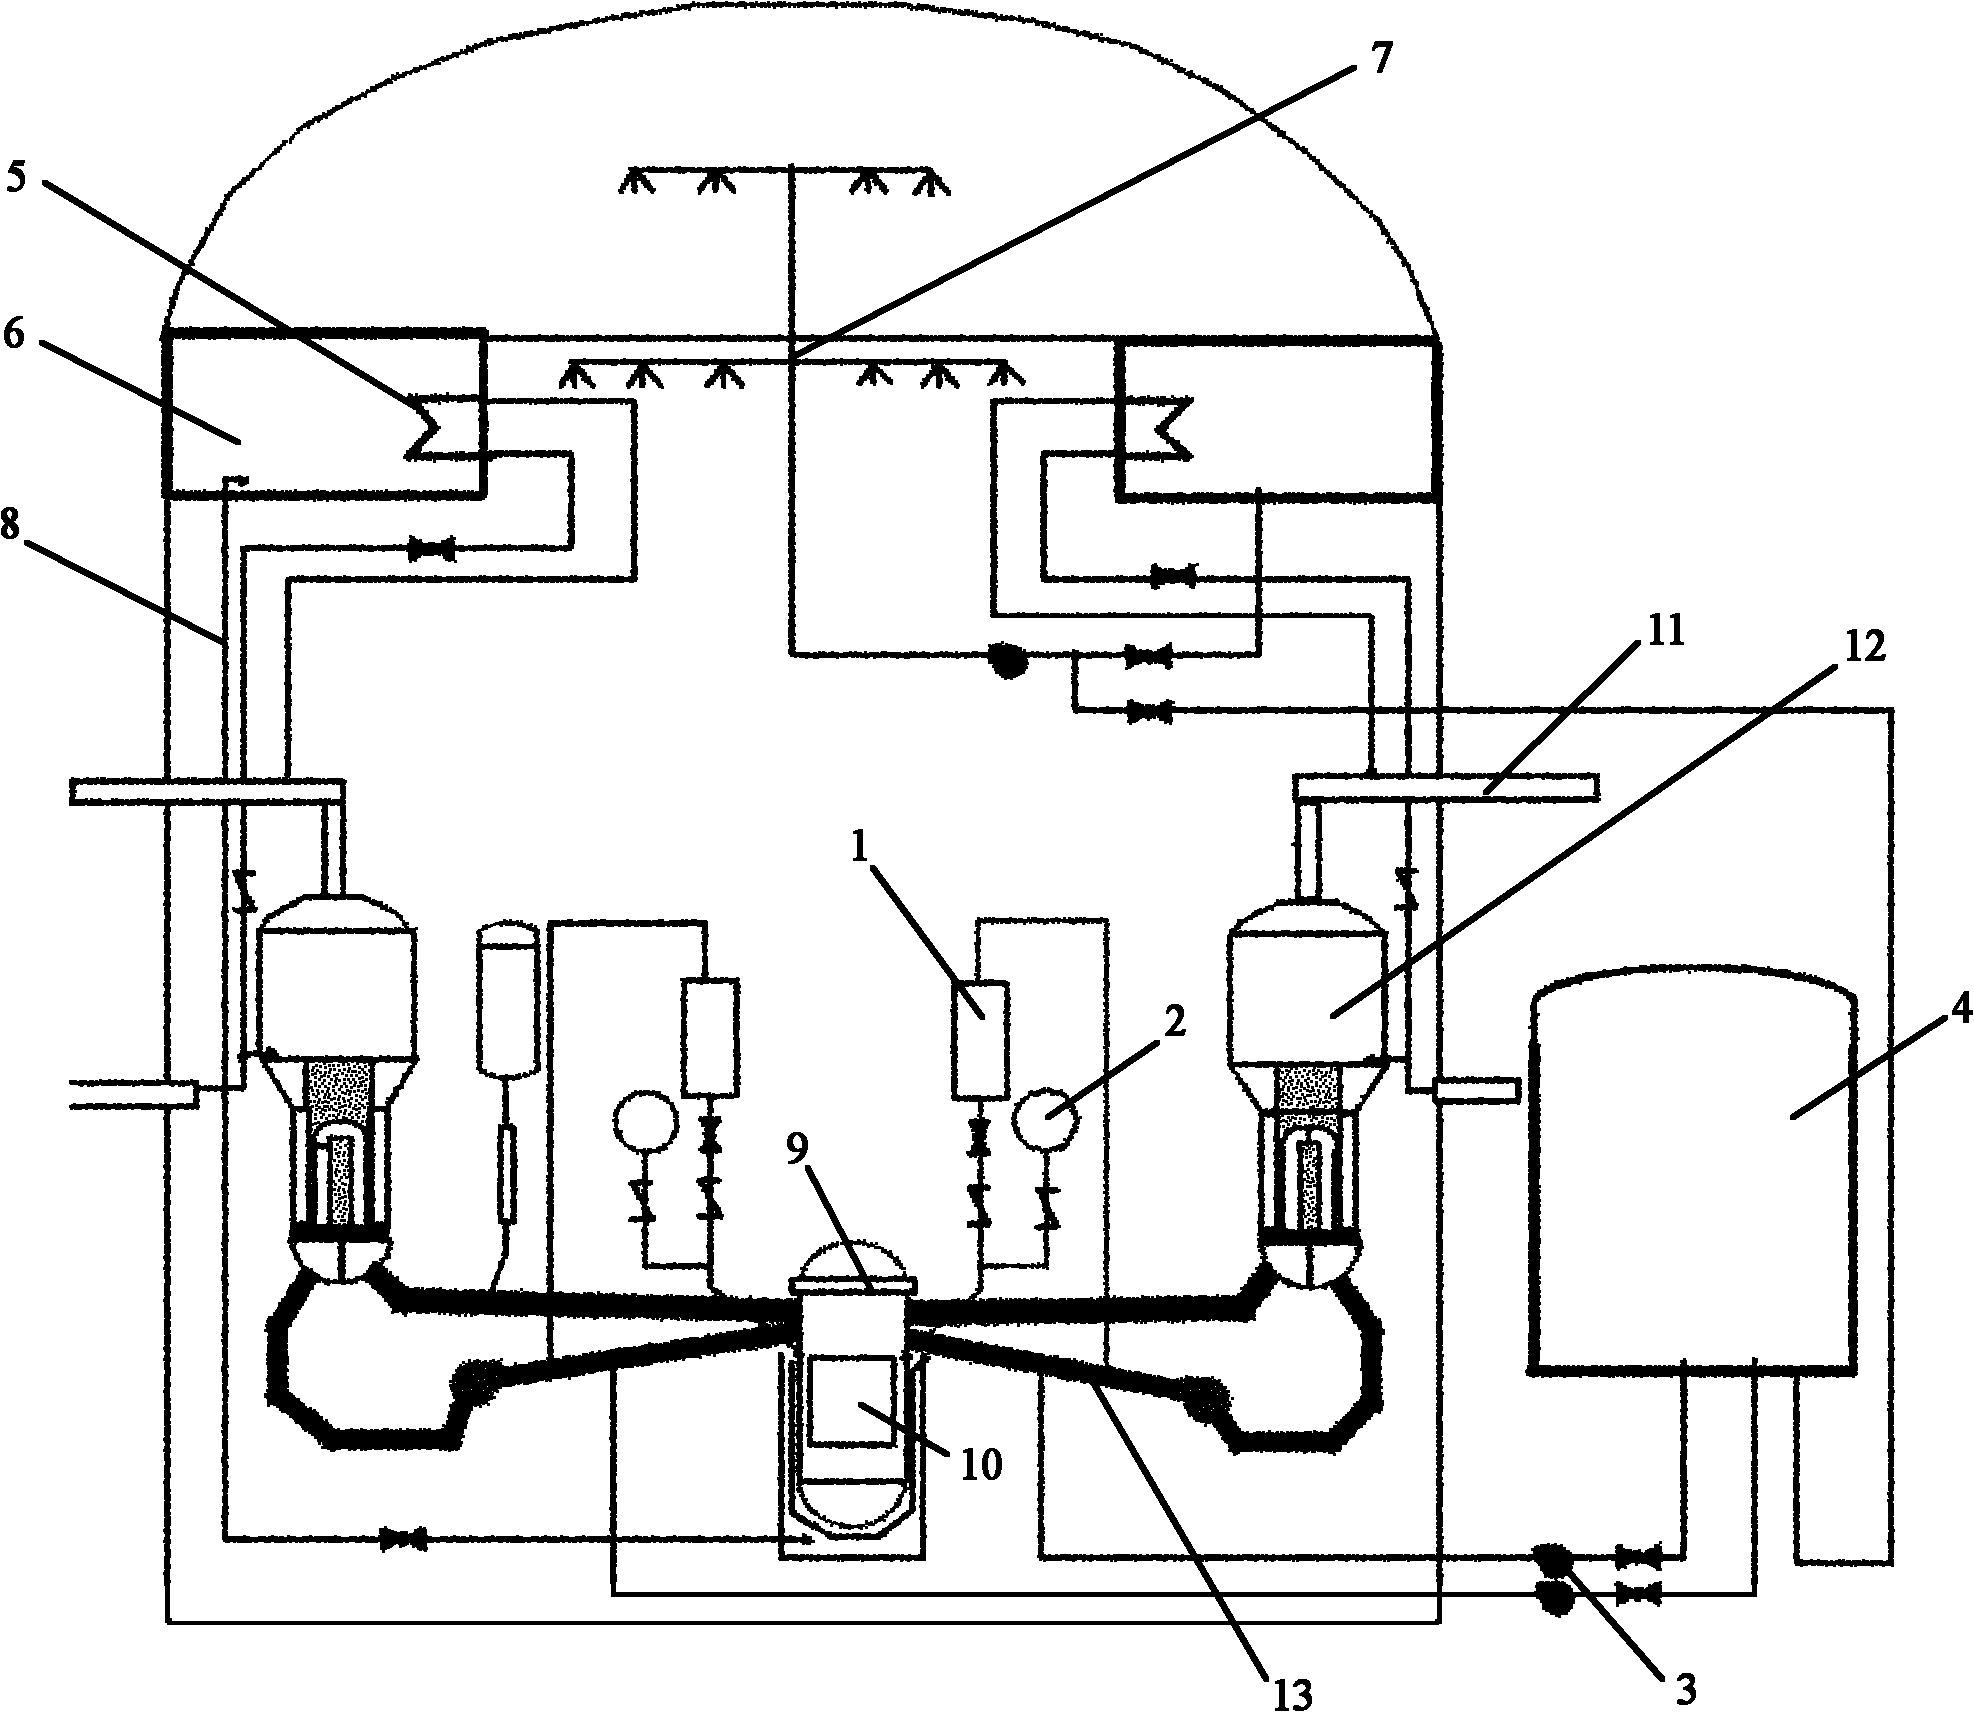 Nuclear power station non-active engineering safety system